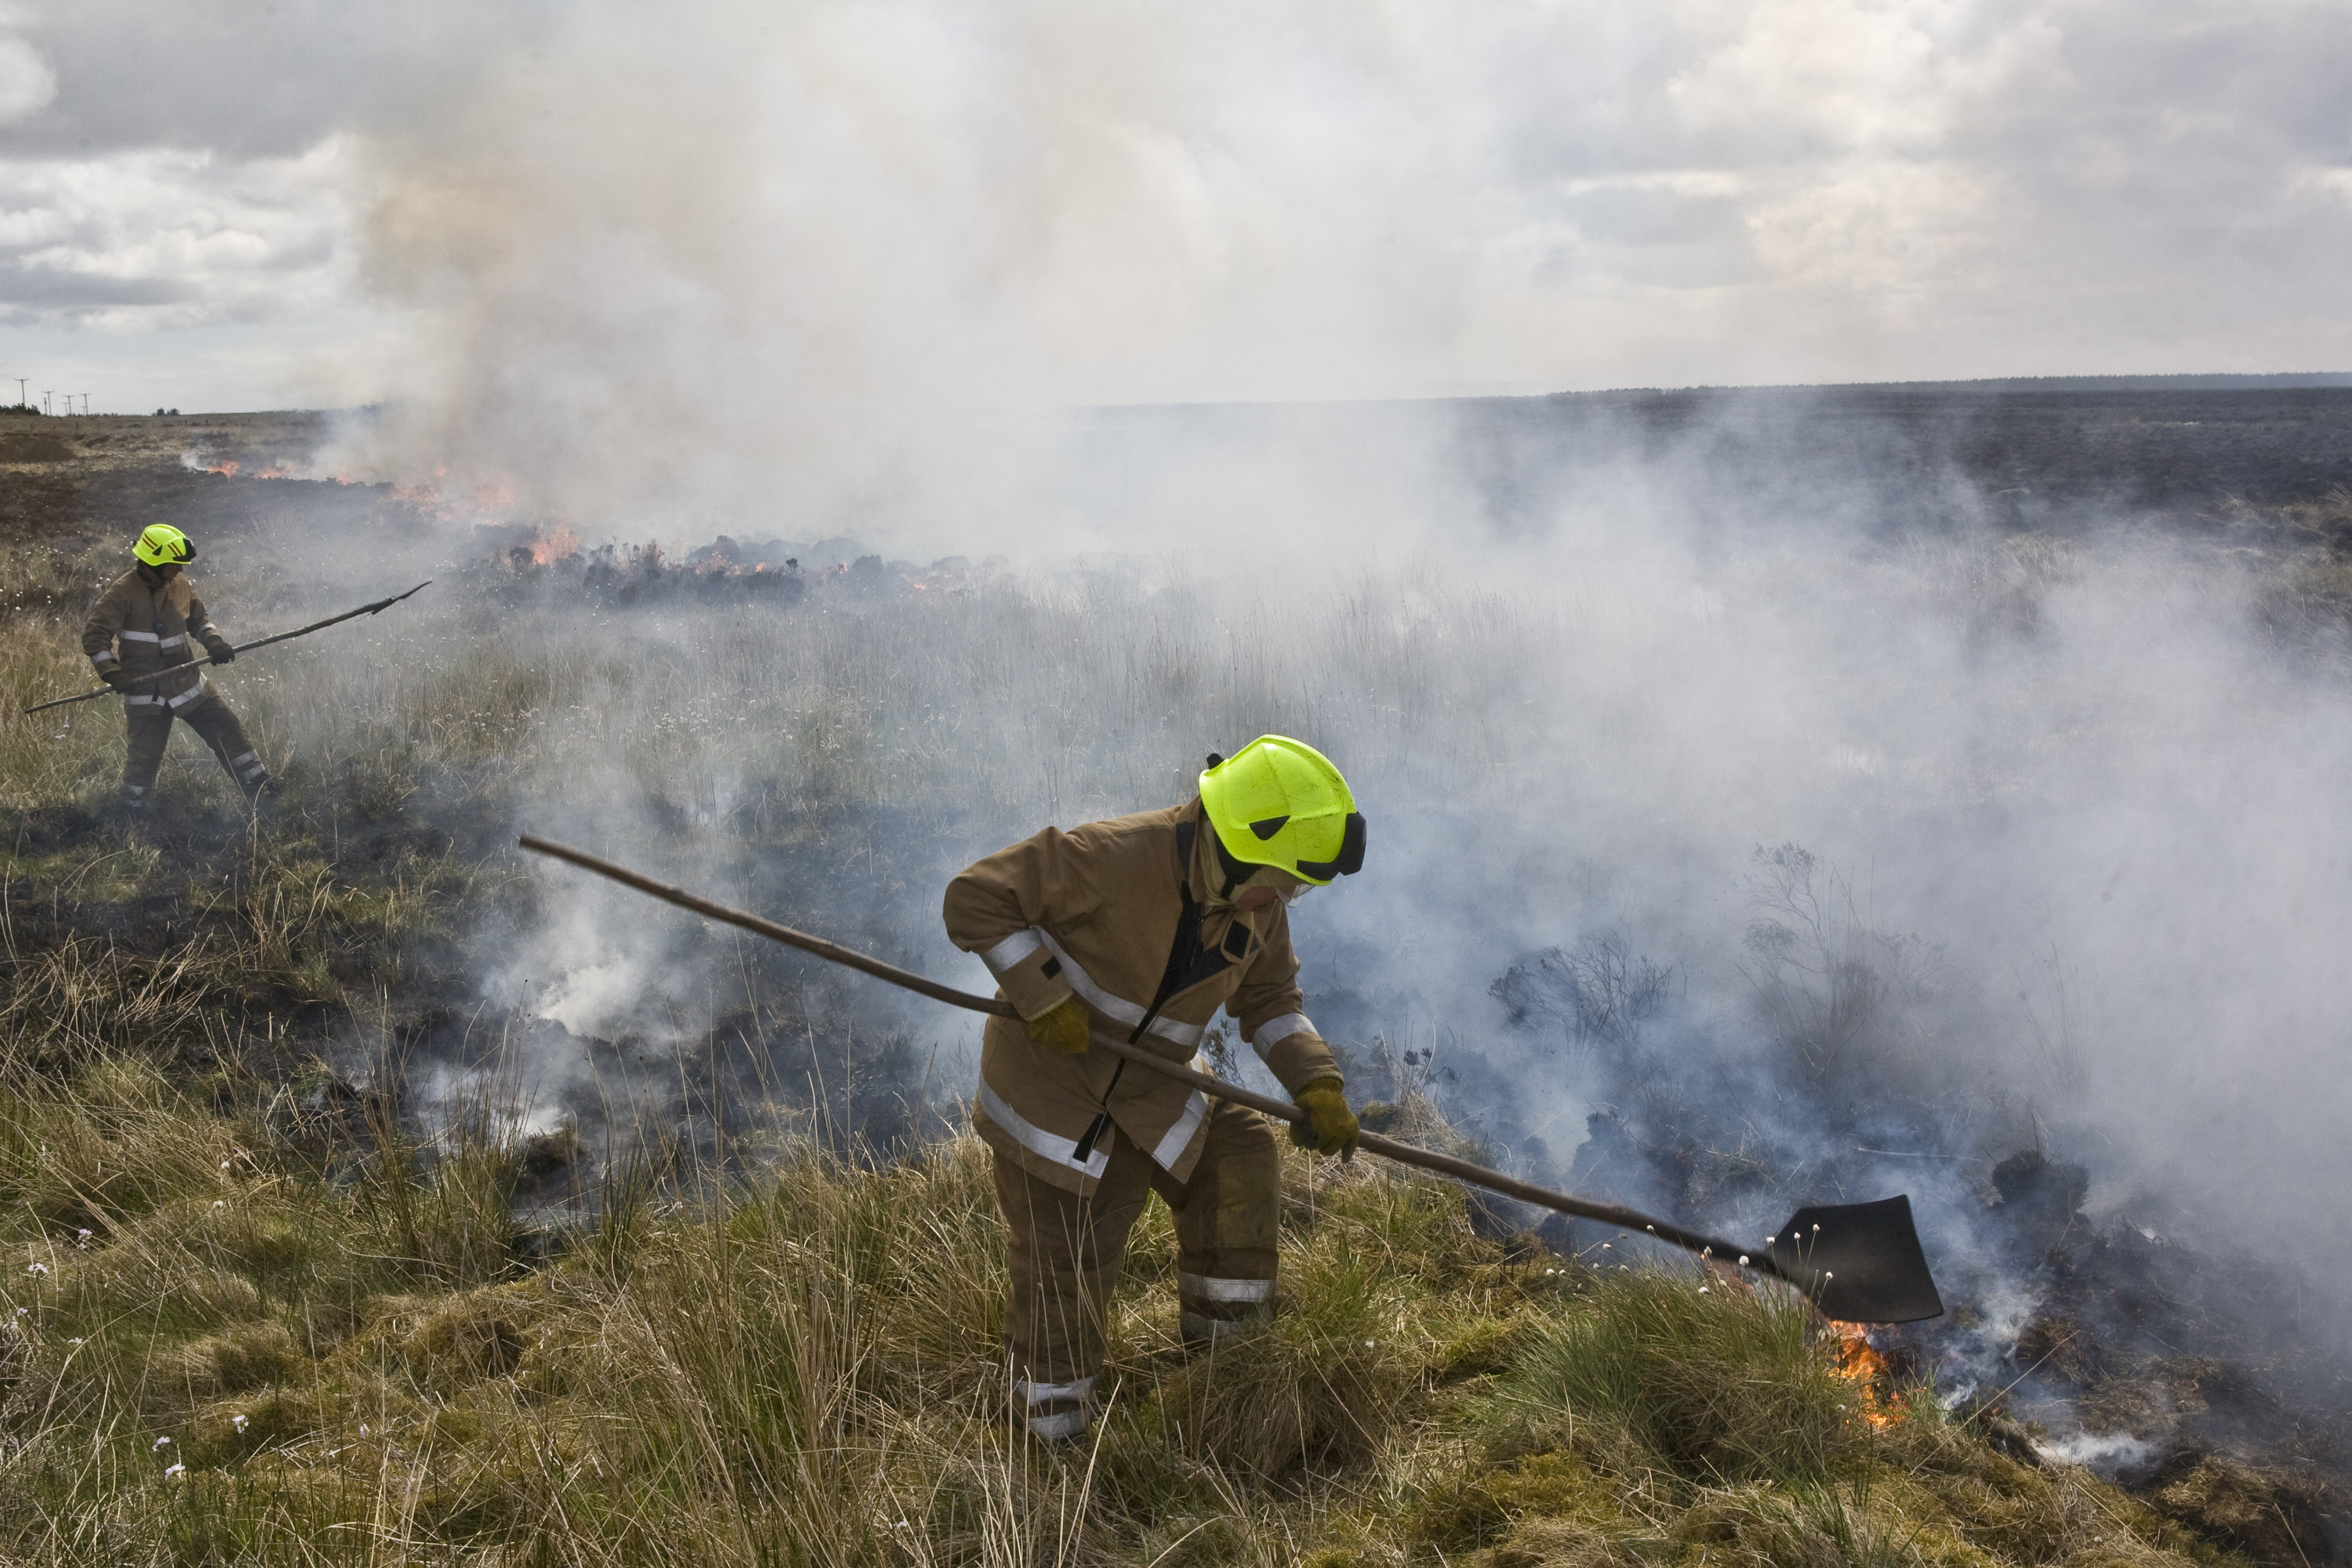 Firefighters tackles the wildfire which spread over a large area of deep peat at Killimster Moss.